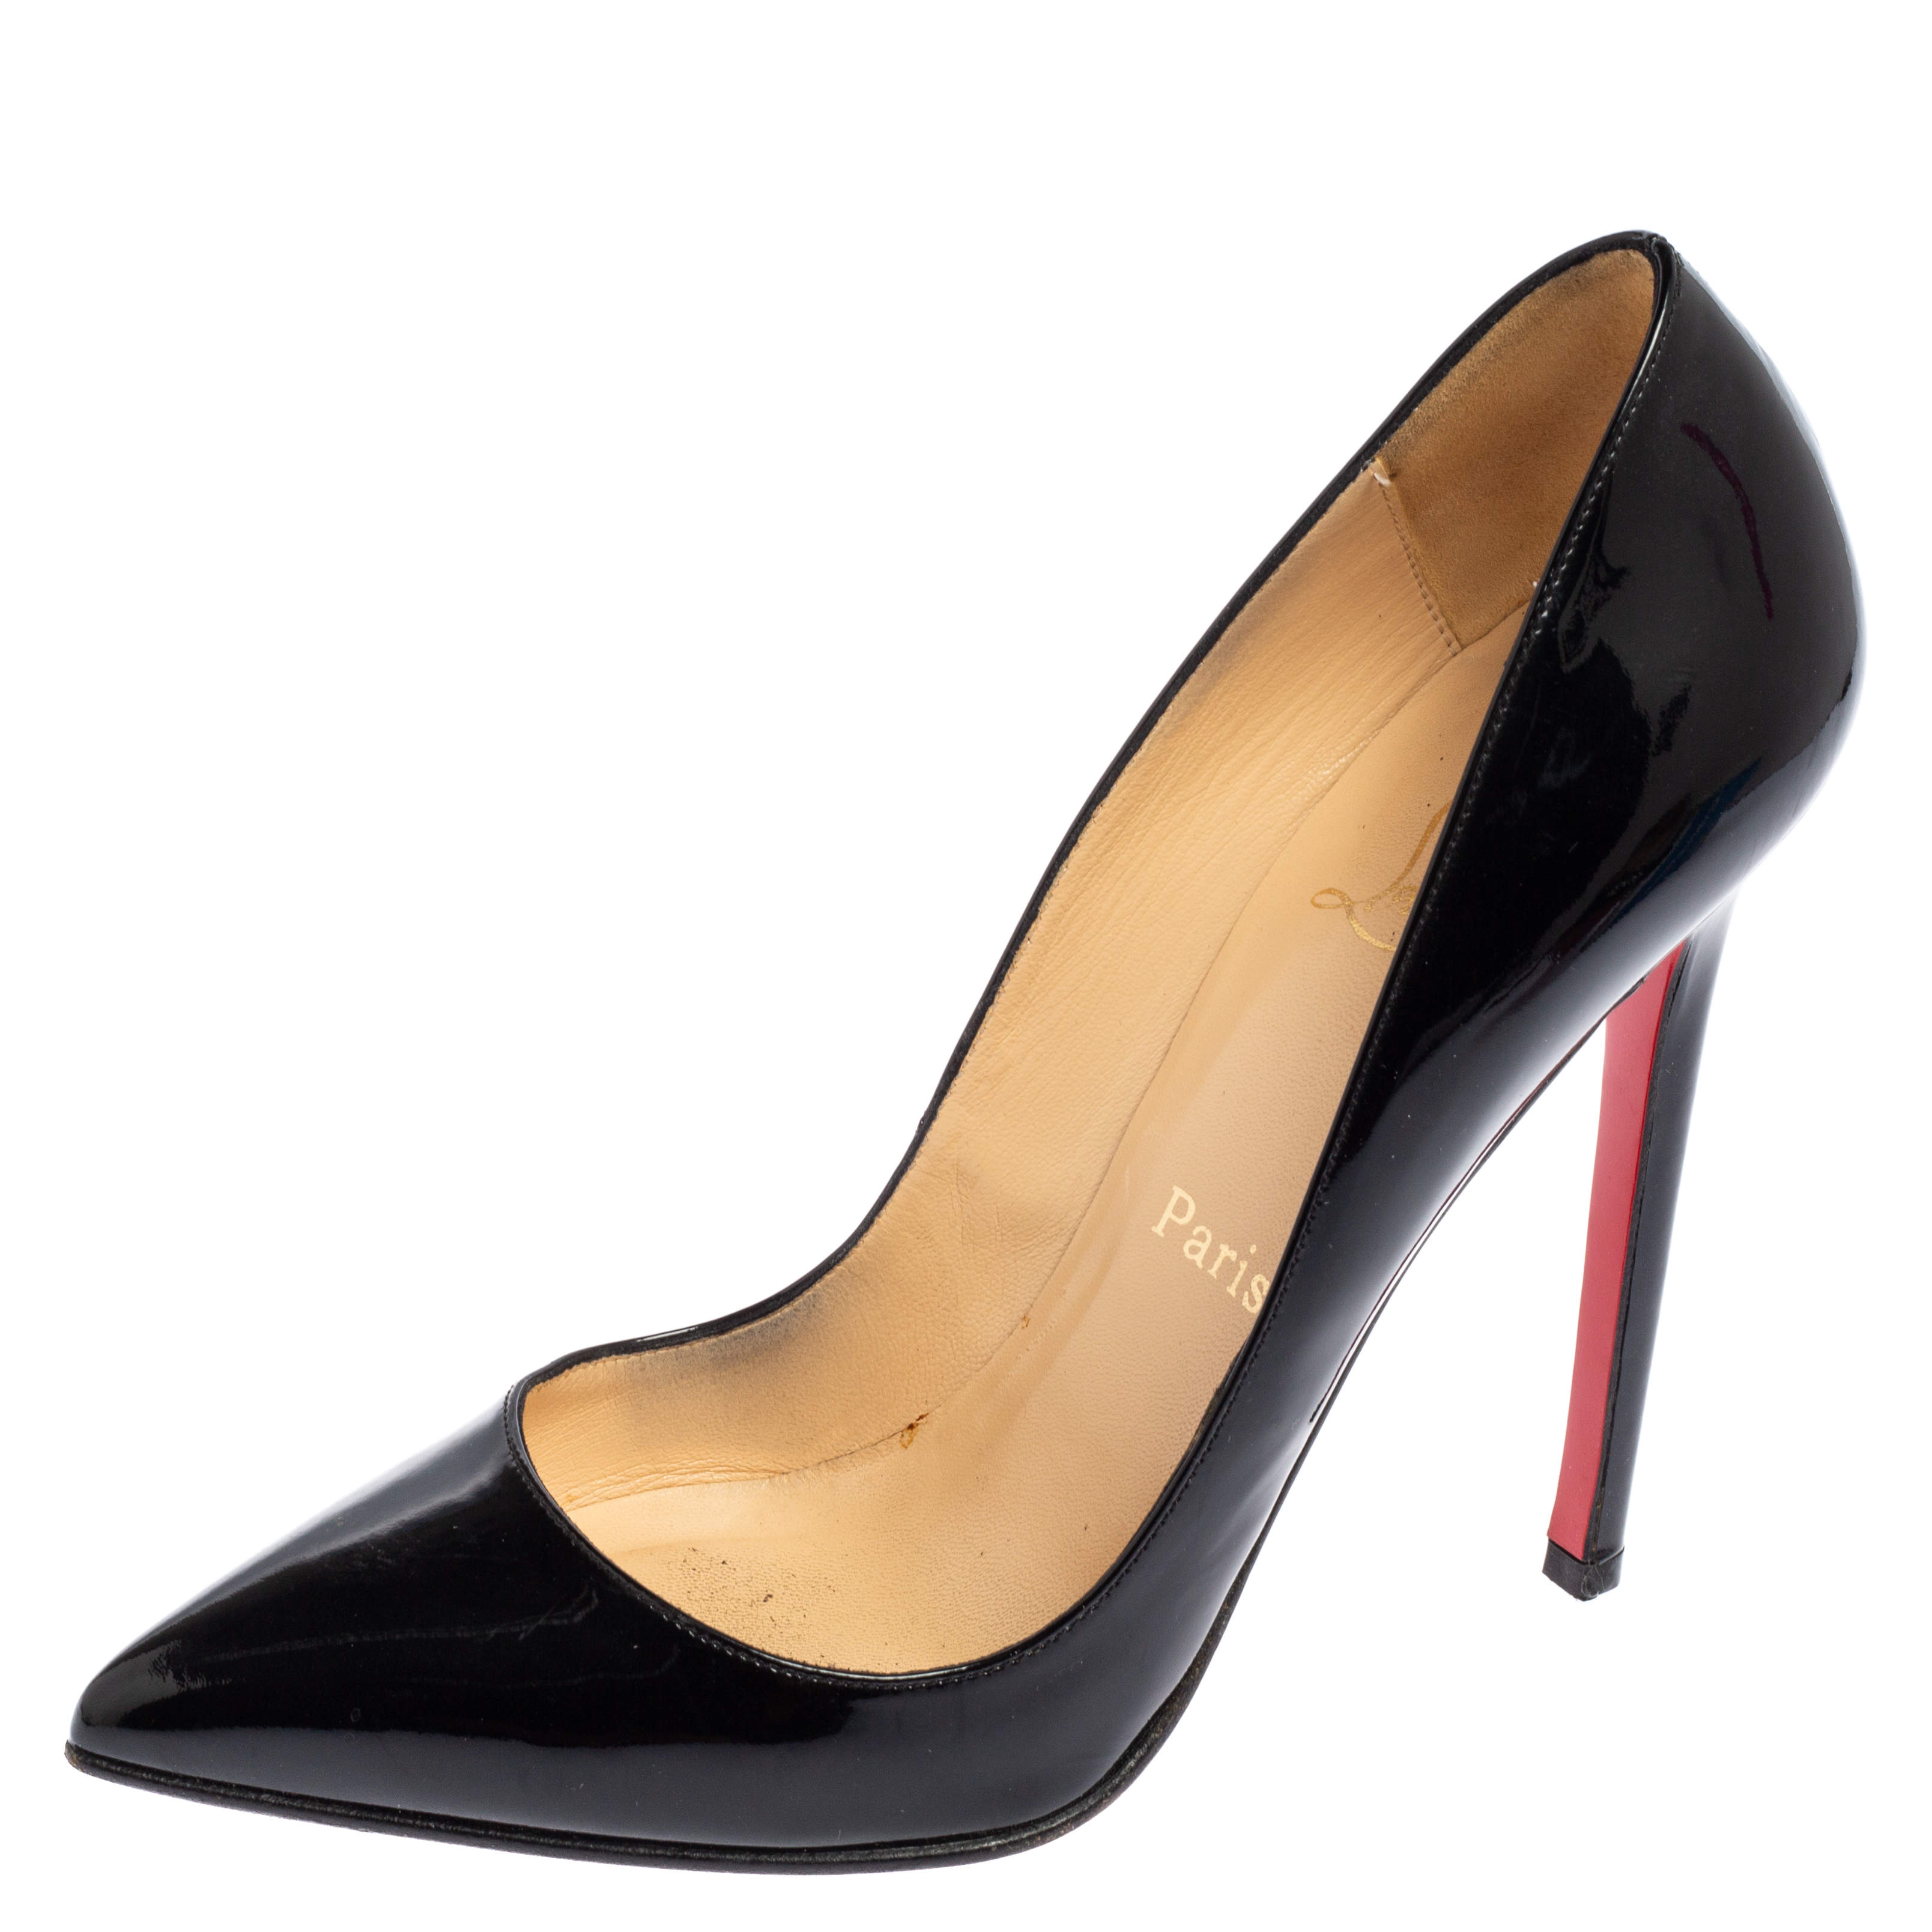 Christian Louboutin Black Patent Leather Pigalle Pumps Size 38